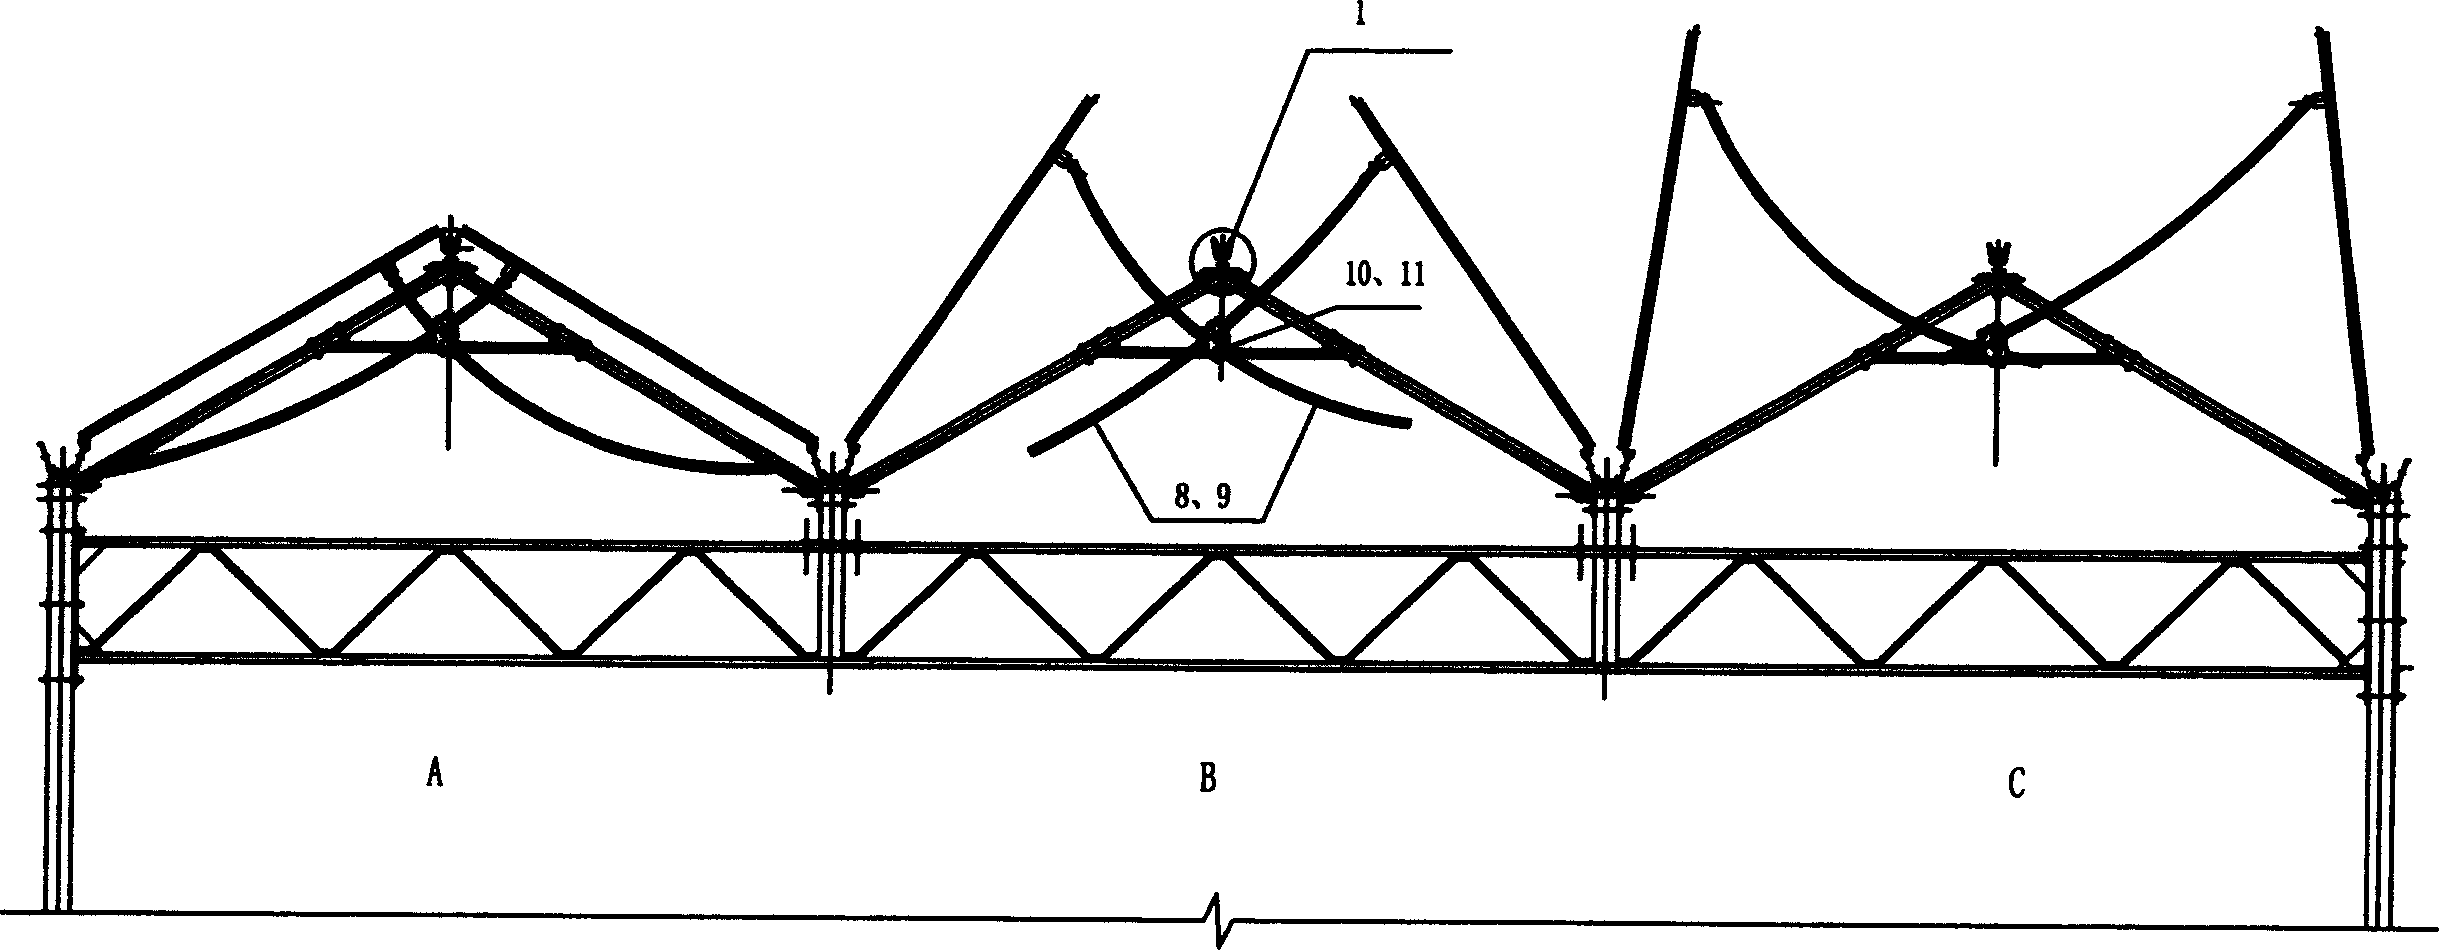 Open top structure of greenhouse with gutter ridge